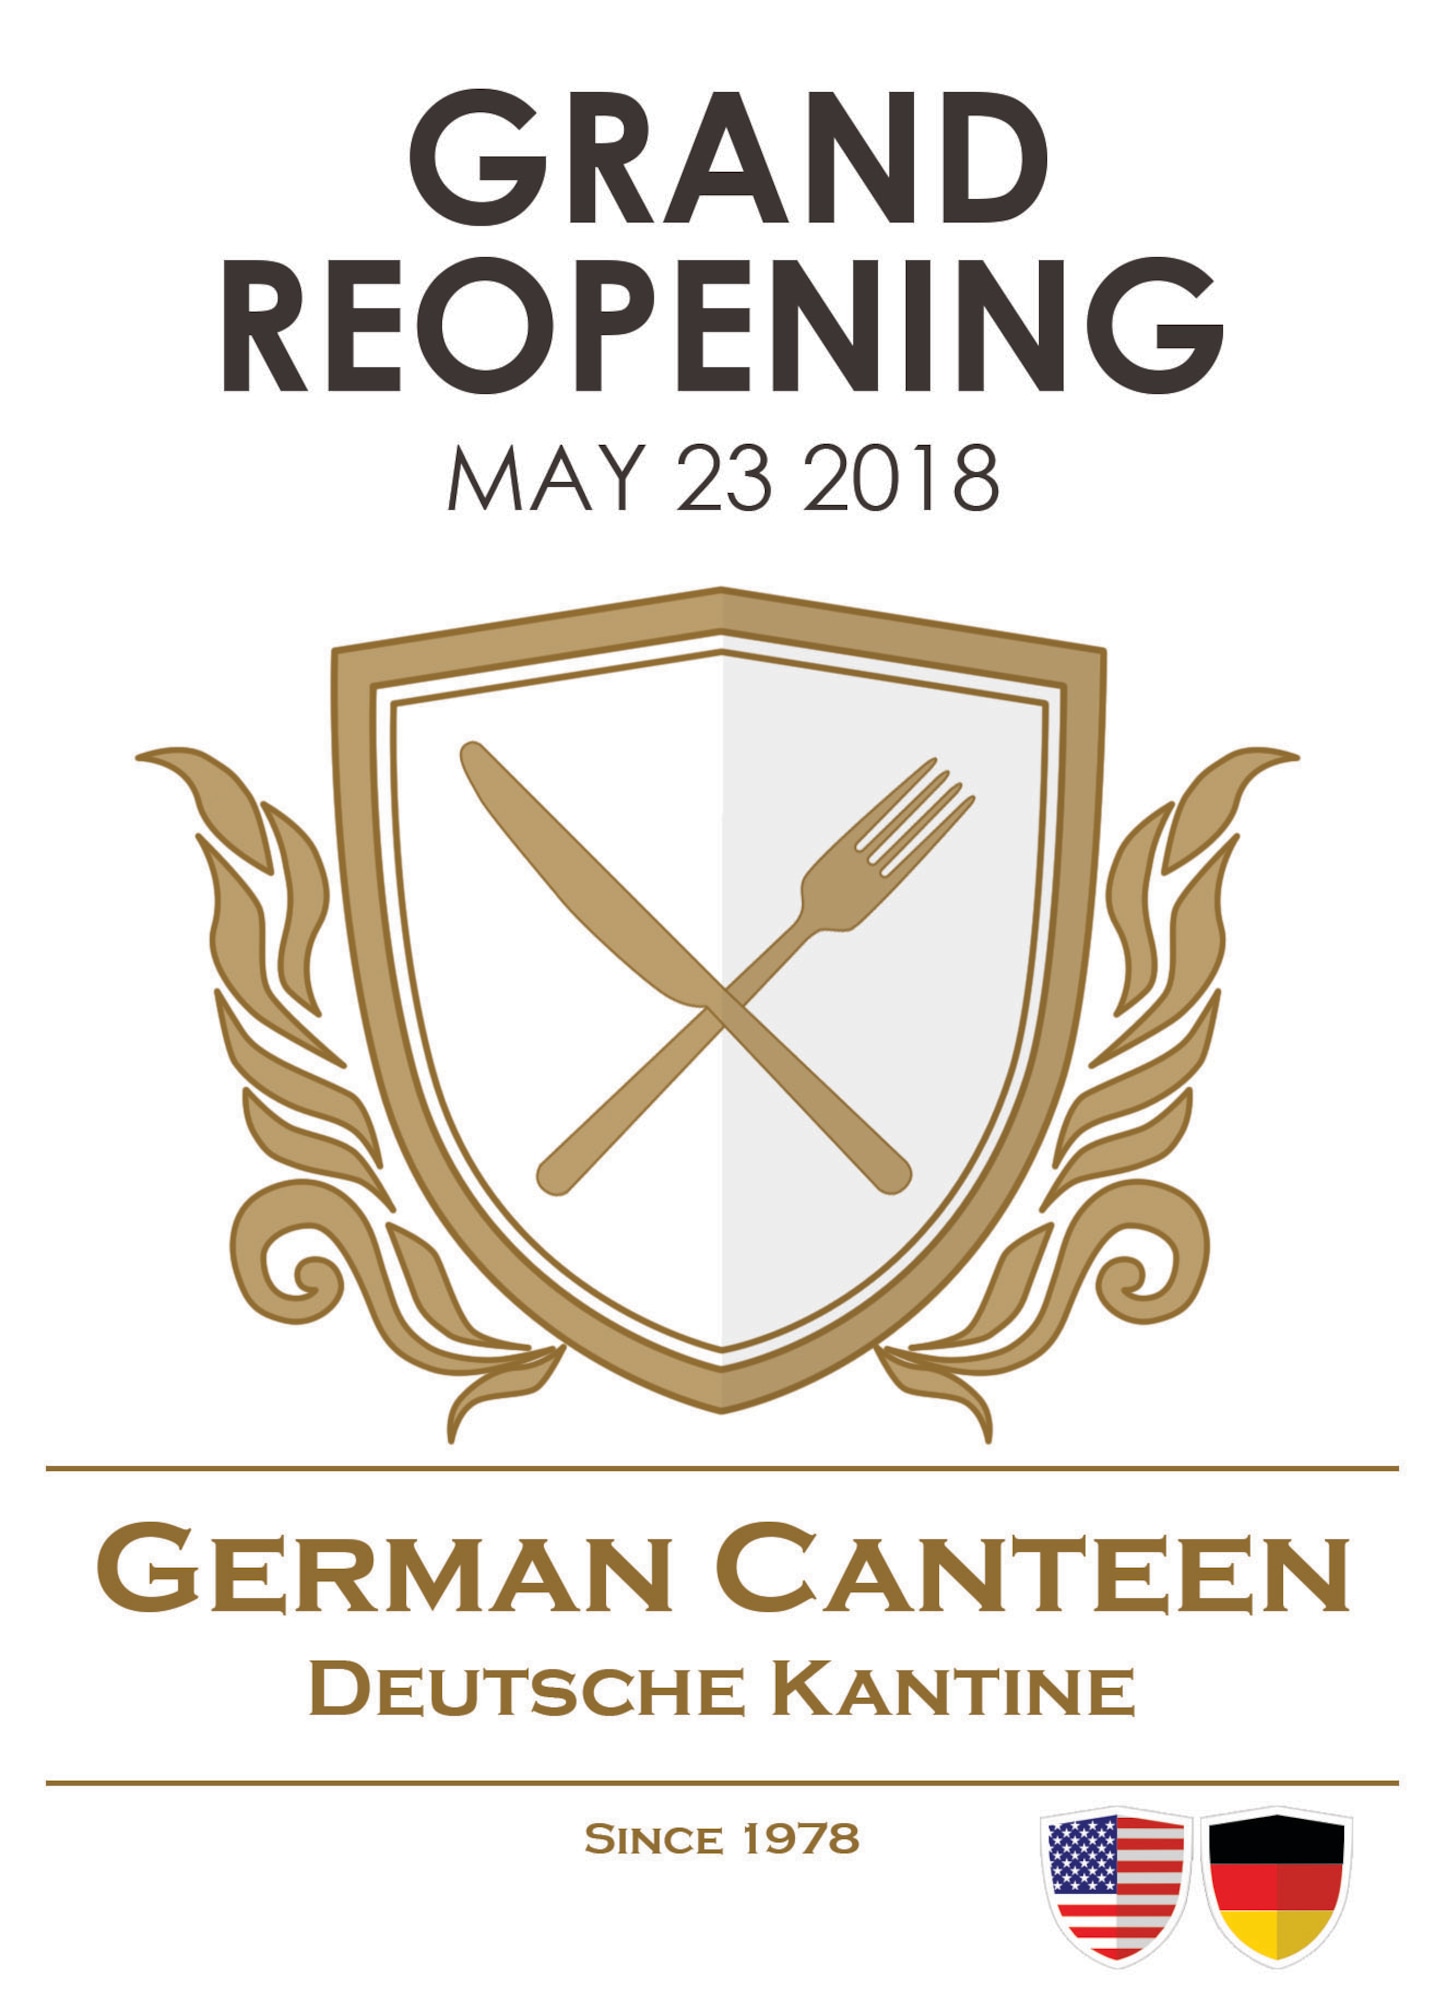 After several months of renovations, the German Canteen on Ramstein Air Base, Germany, will reopen to the public May 23, 2018 at 6 a.m.